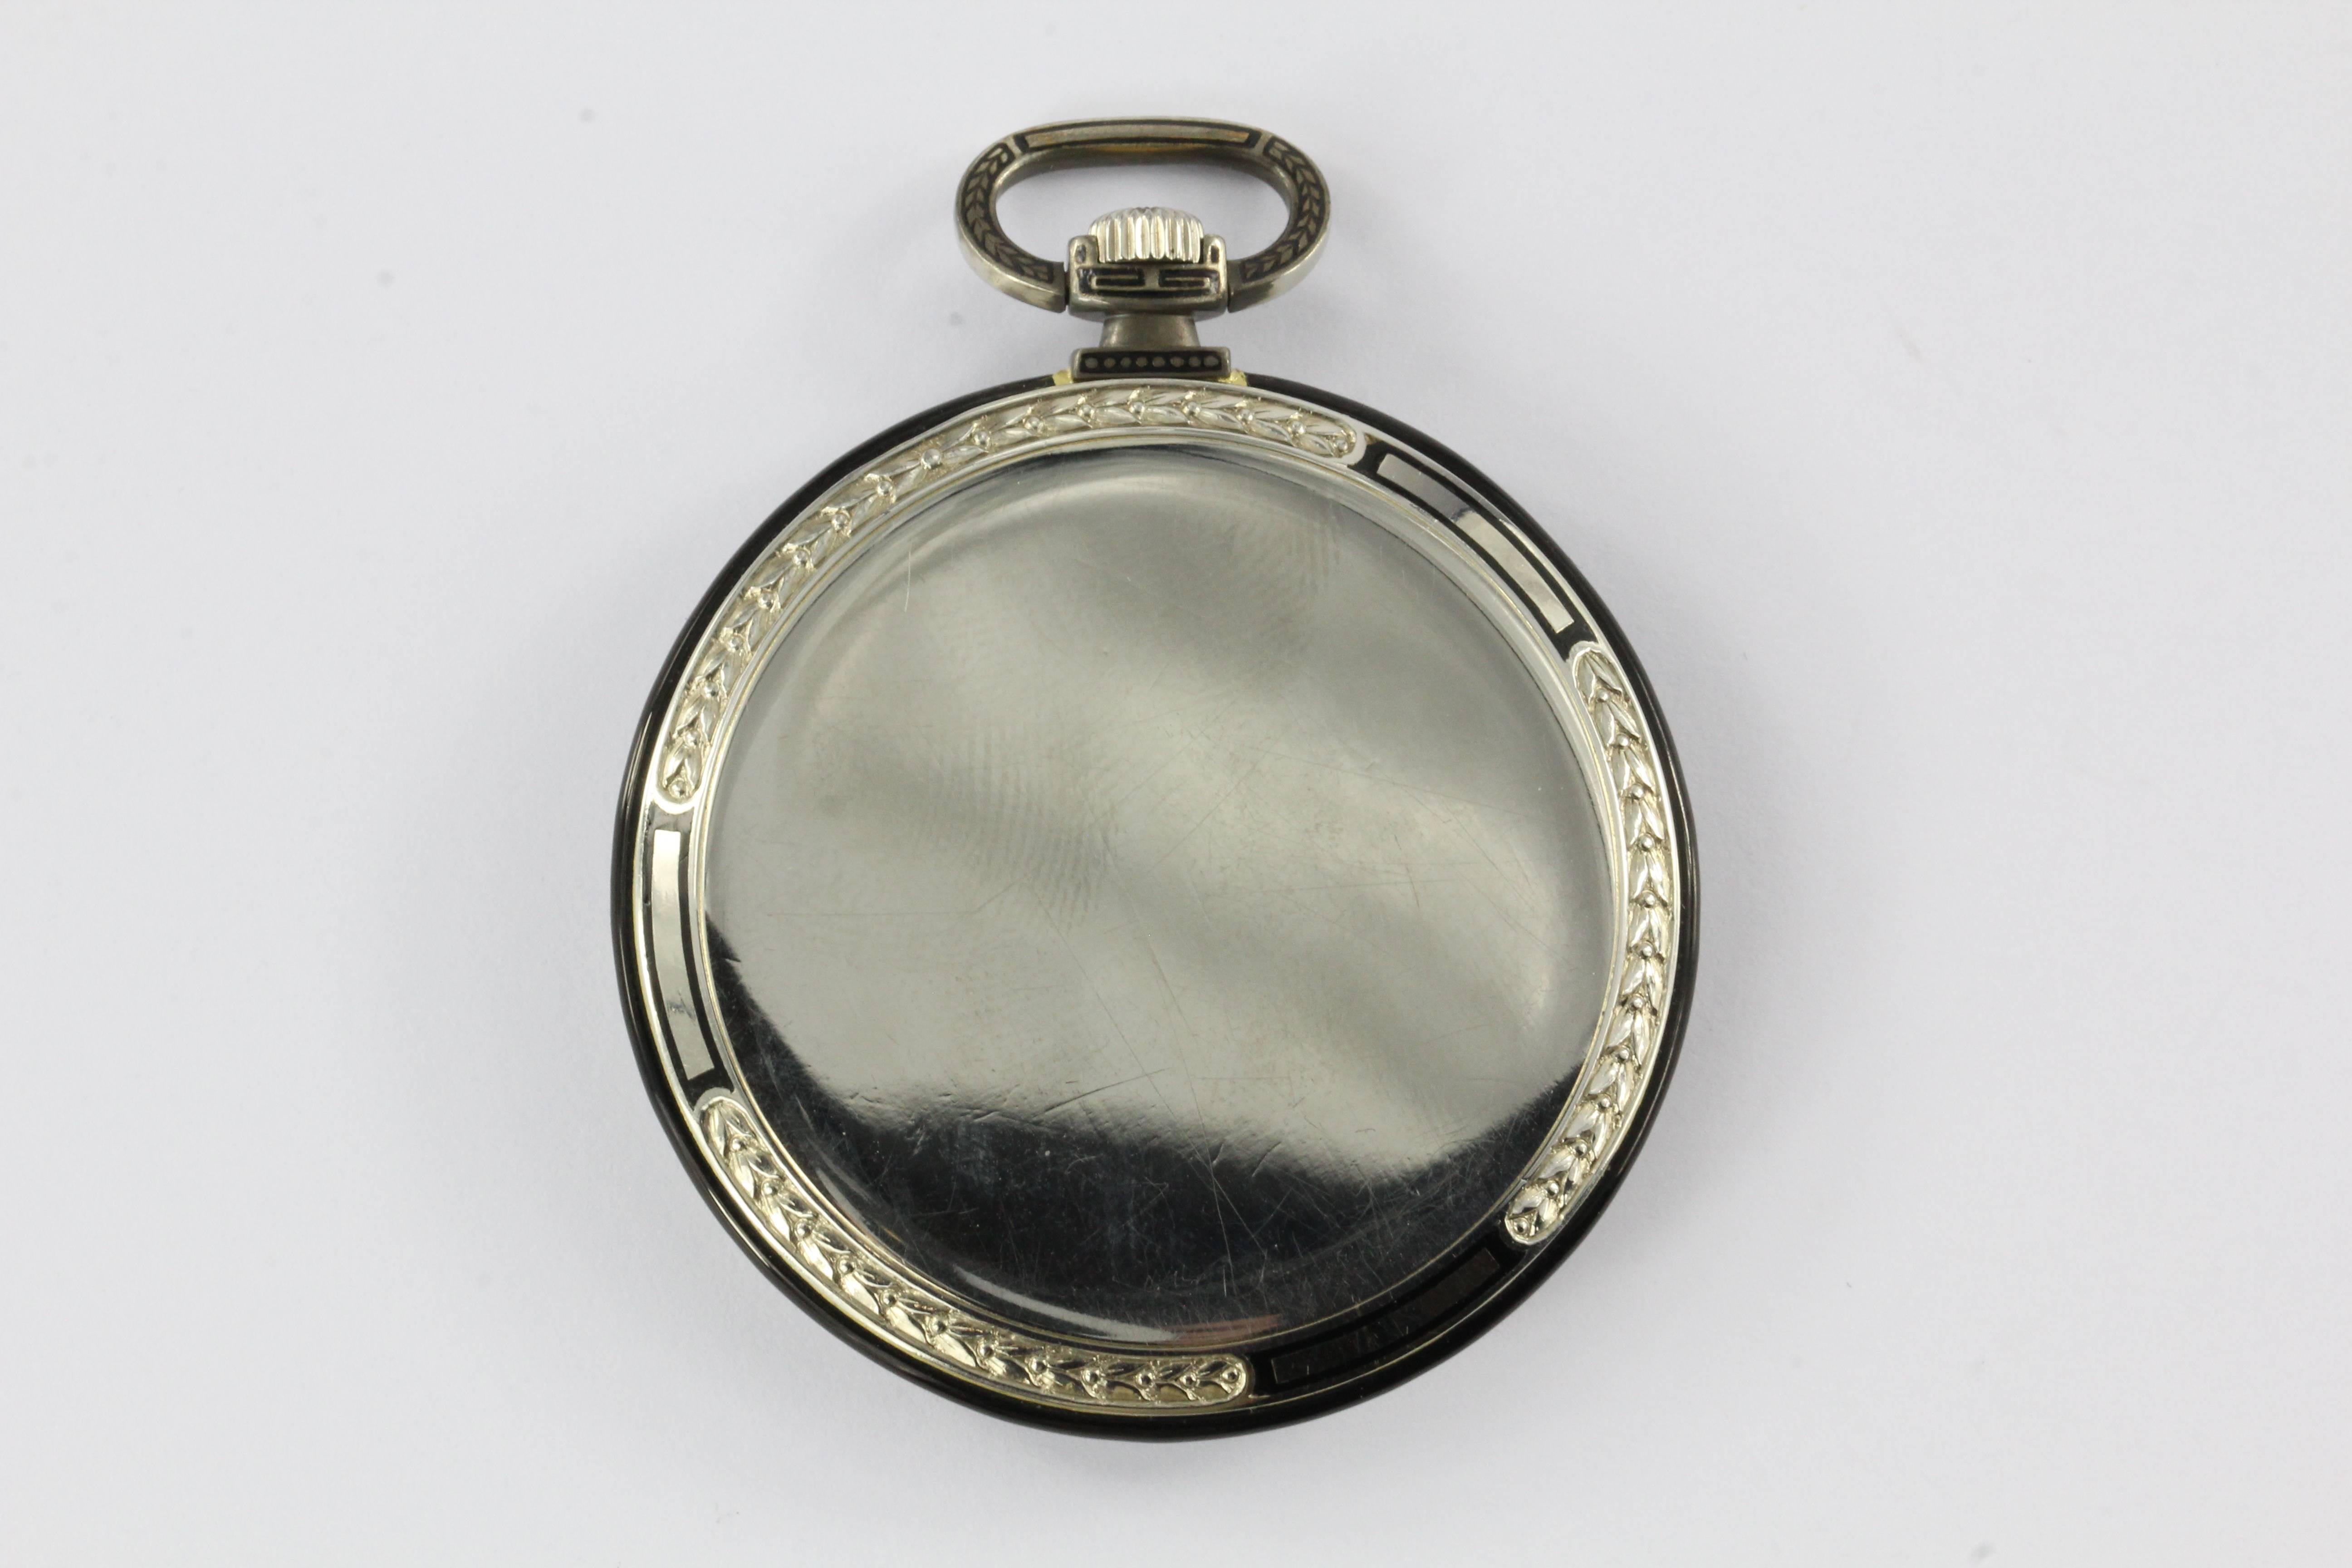 Art Deco 18K White Gold Black Enamel Ultra Thin Pocket Watch c.1924

The watch is in excellent estate condition, running great and ready to use. The case is 18k white Gold with black enamel decoration. The enamel work in excellent condition. The